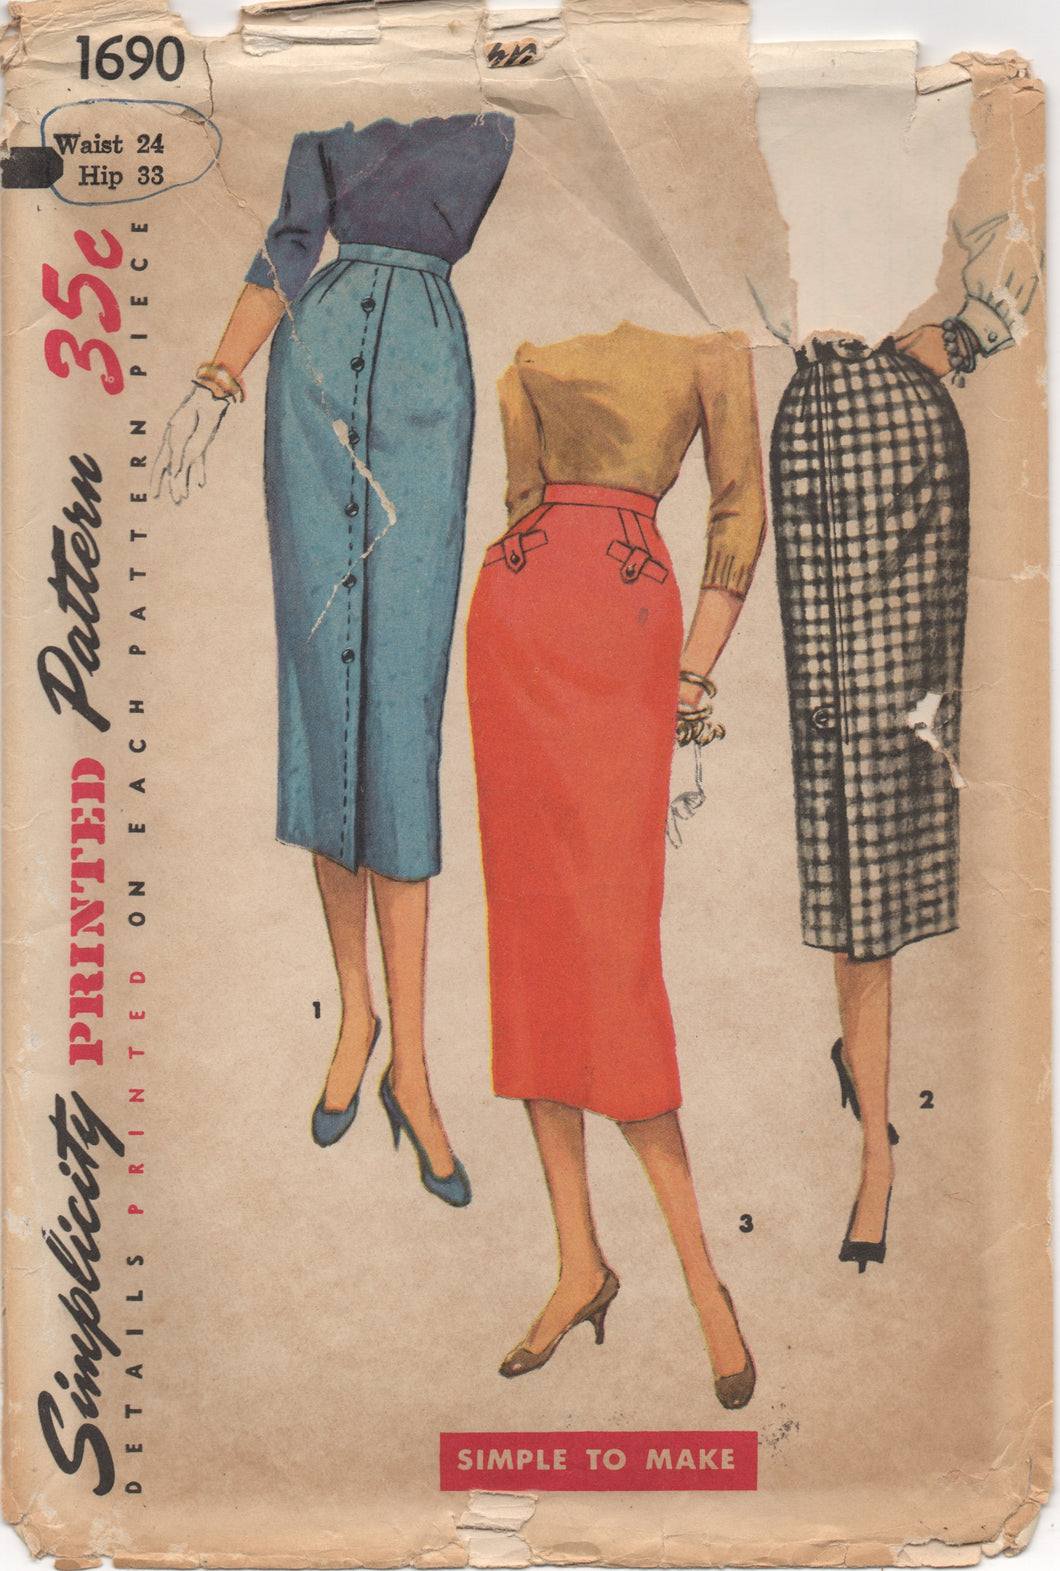 1950's Simplicity Slim Skirt Pattern with Tab Accents - Waist 24